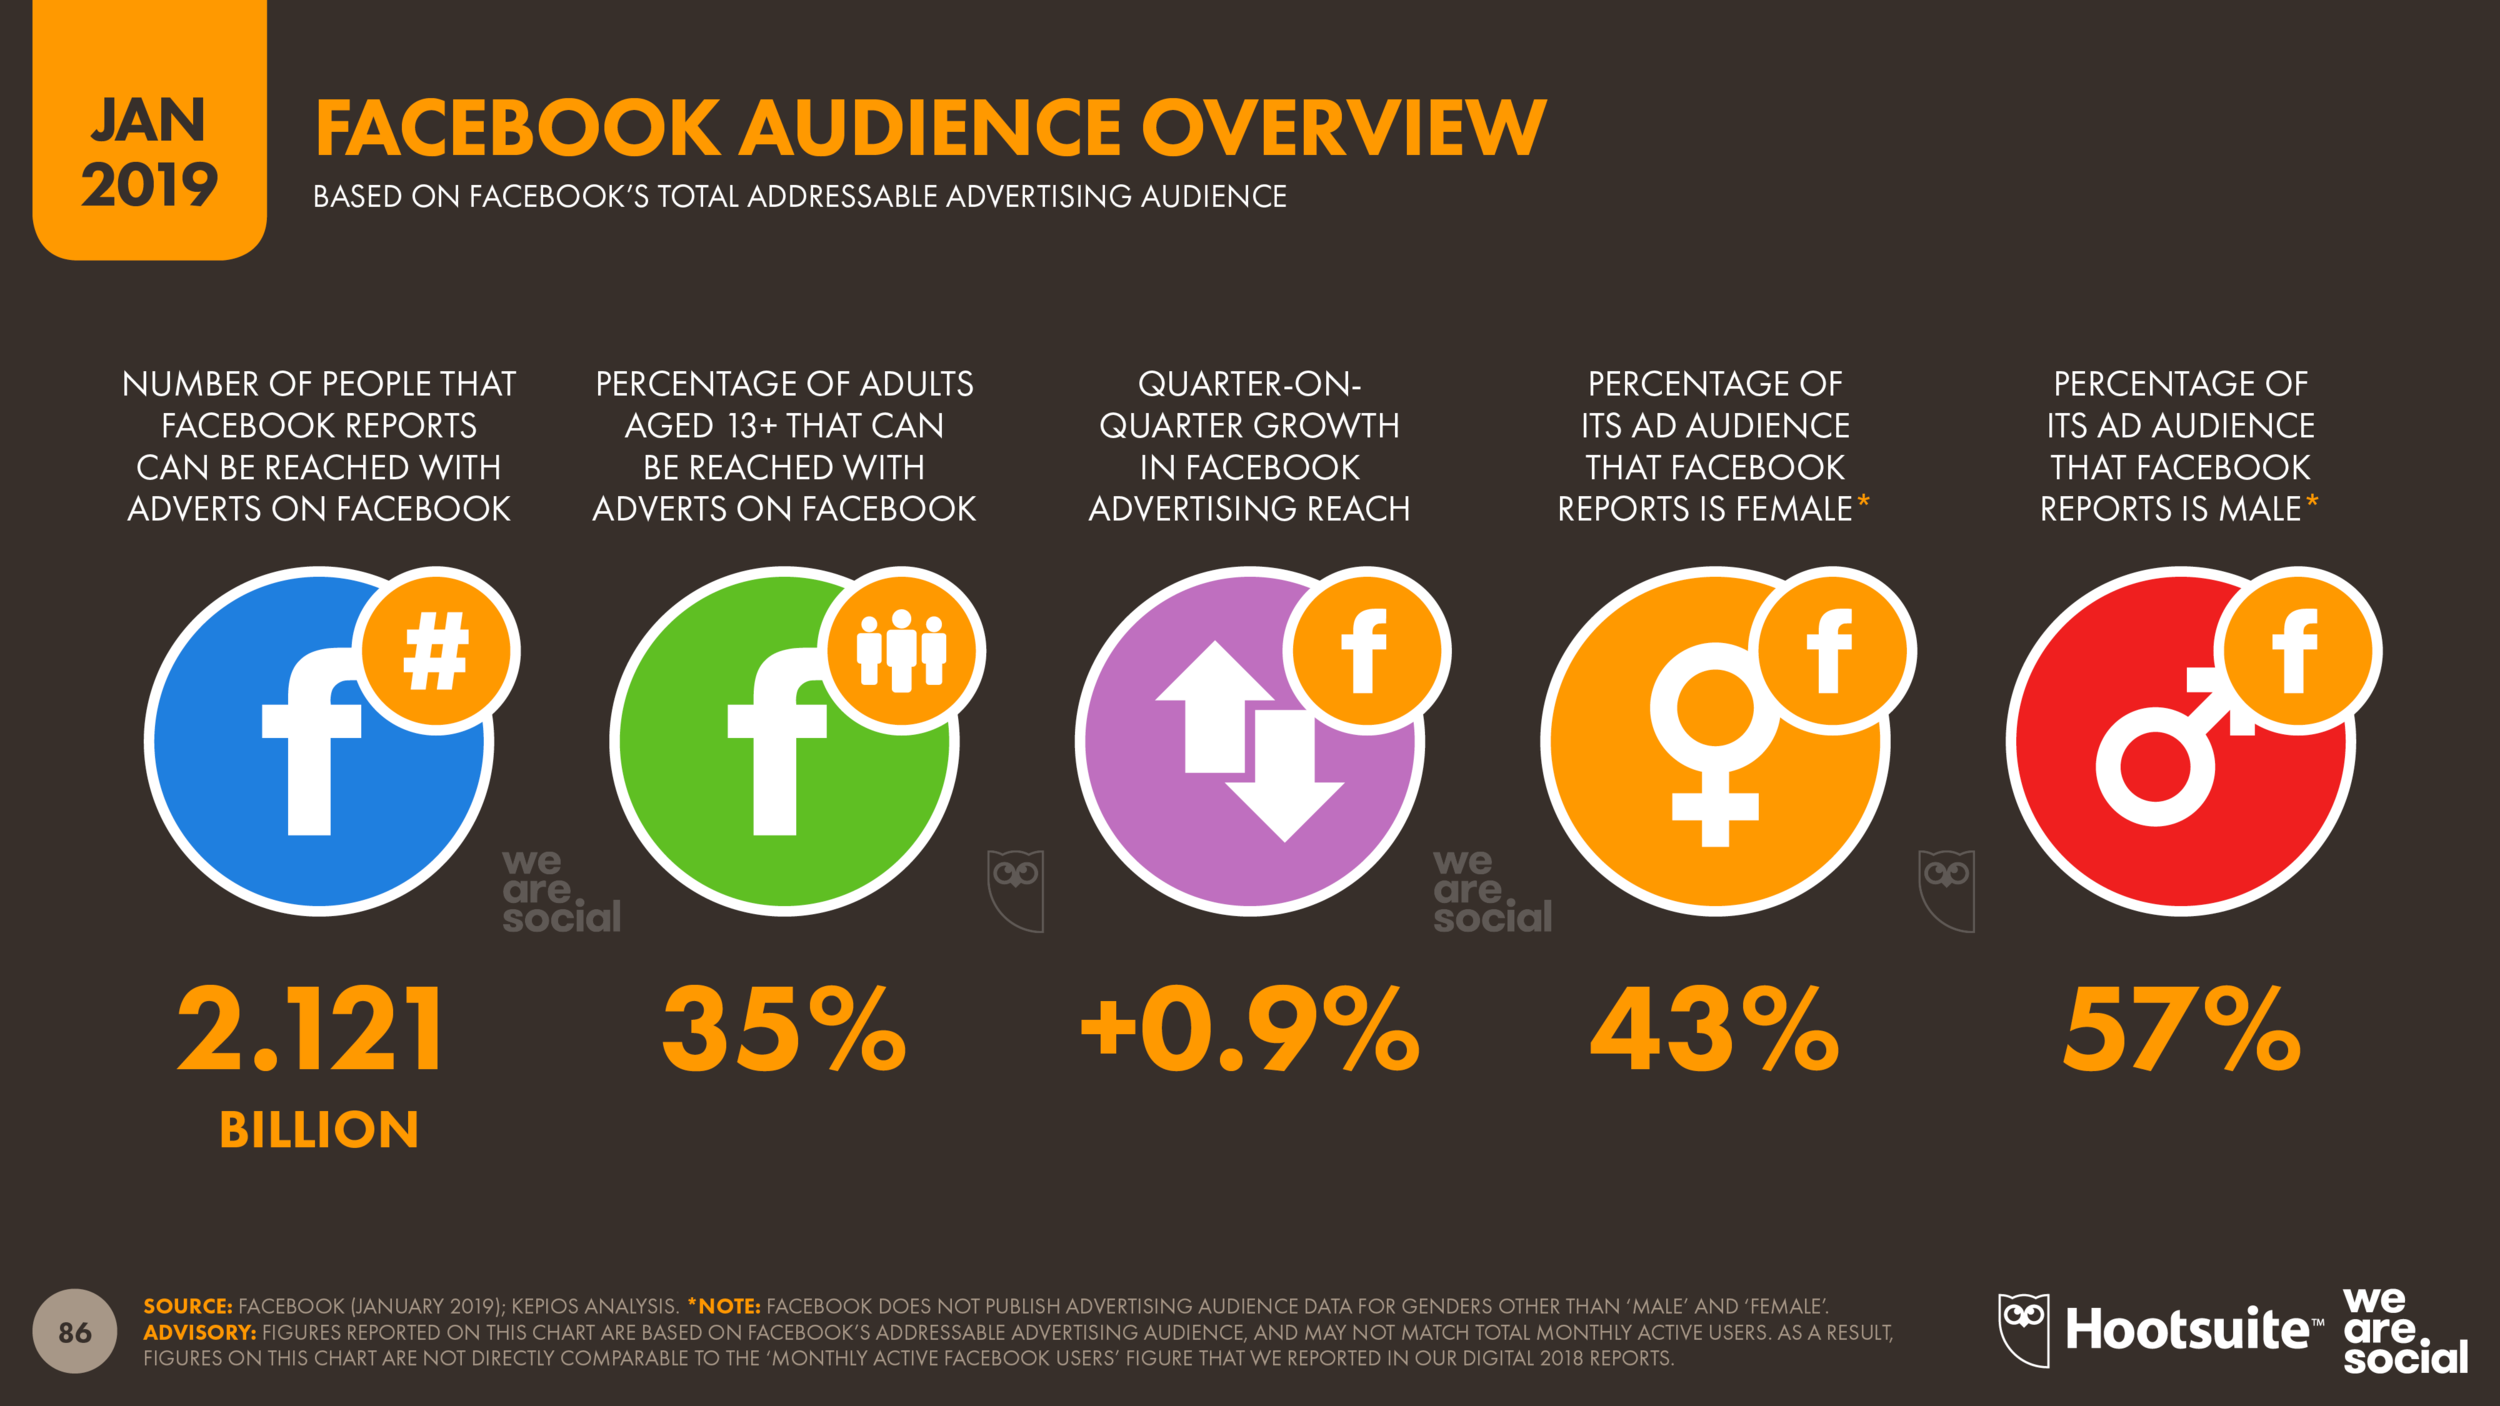 Facebook Advertising Audience Overview January 2019